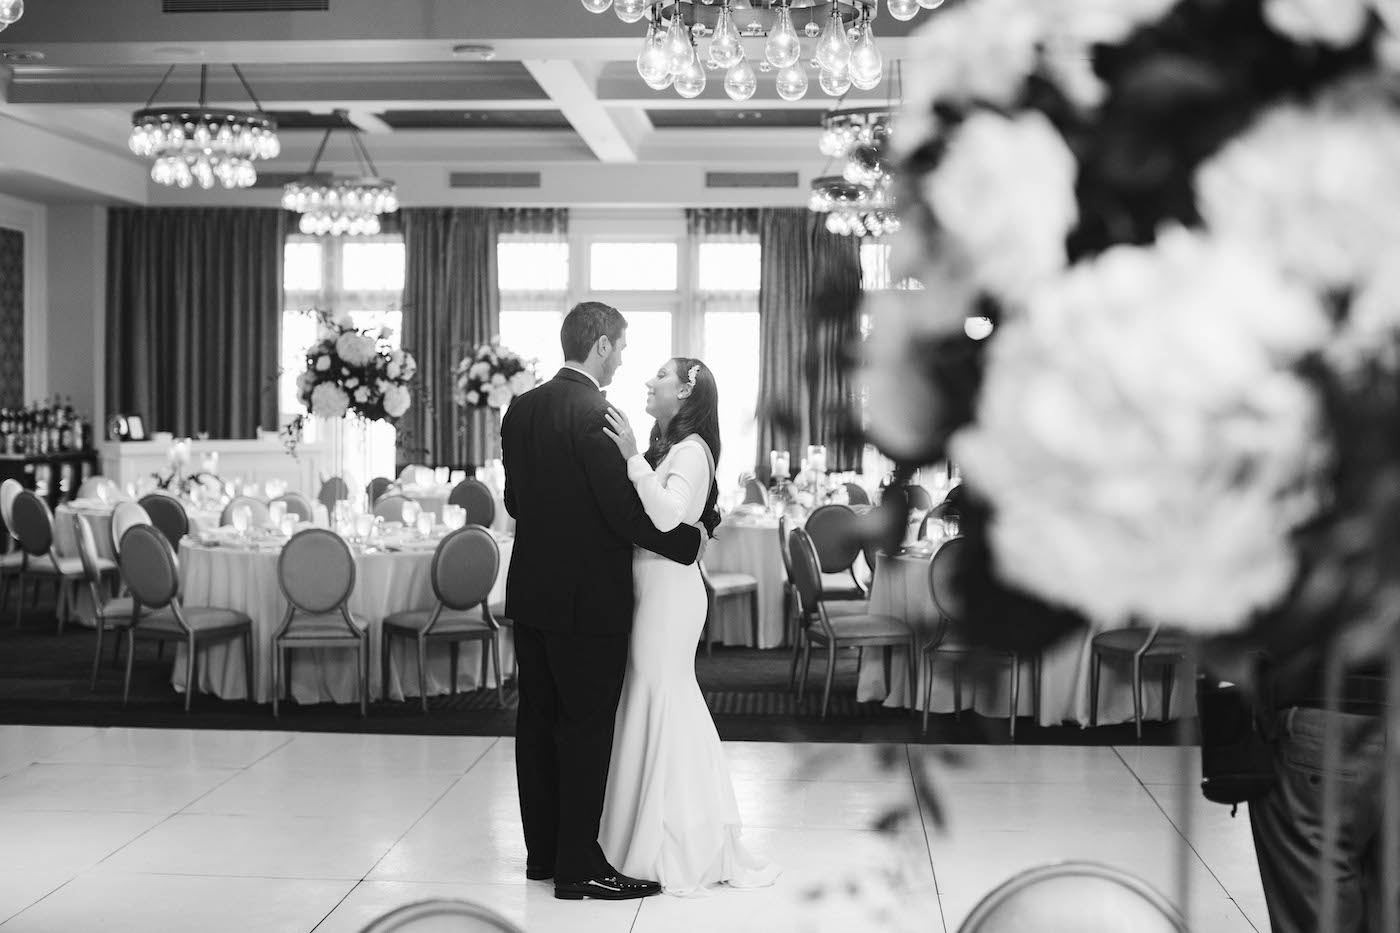 Classic Florida Bride and Groom Dance in Wedding Reception Ballroom Before Guests Arrived | Tampa Bay Boutique Hotel and Venue The Birchwood | Downtown St. Pete Florist Bruce Wayne Florals | Grant Hemond and Associates Wedding DJ